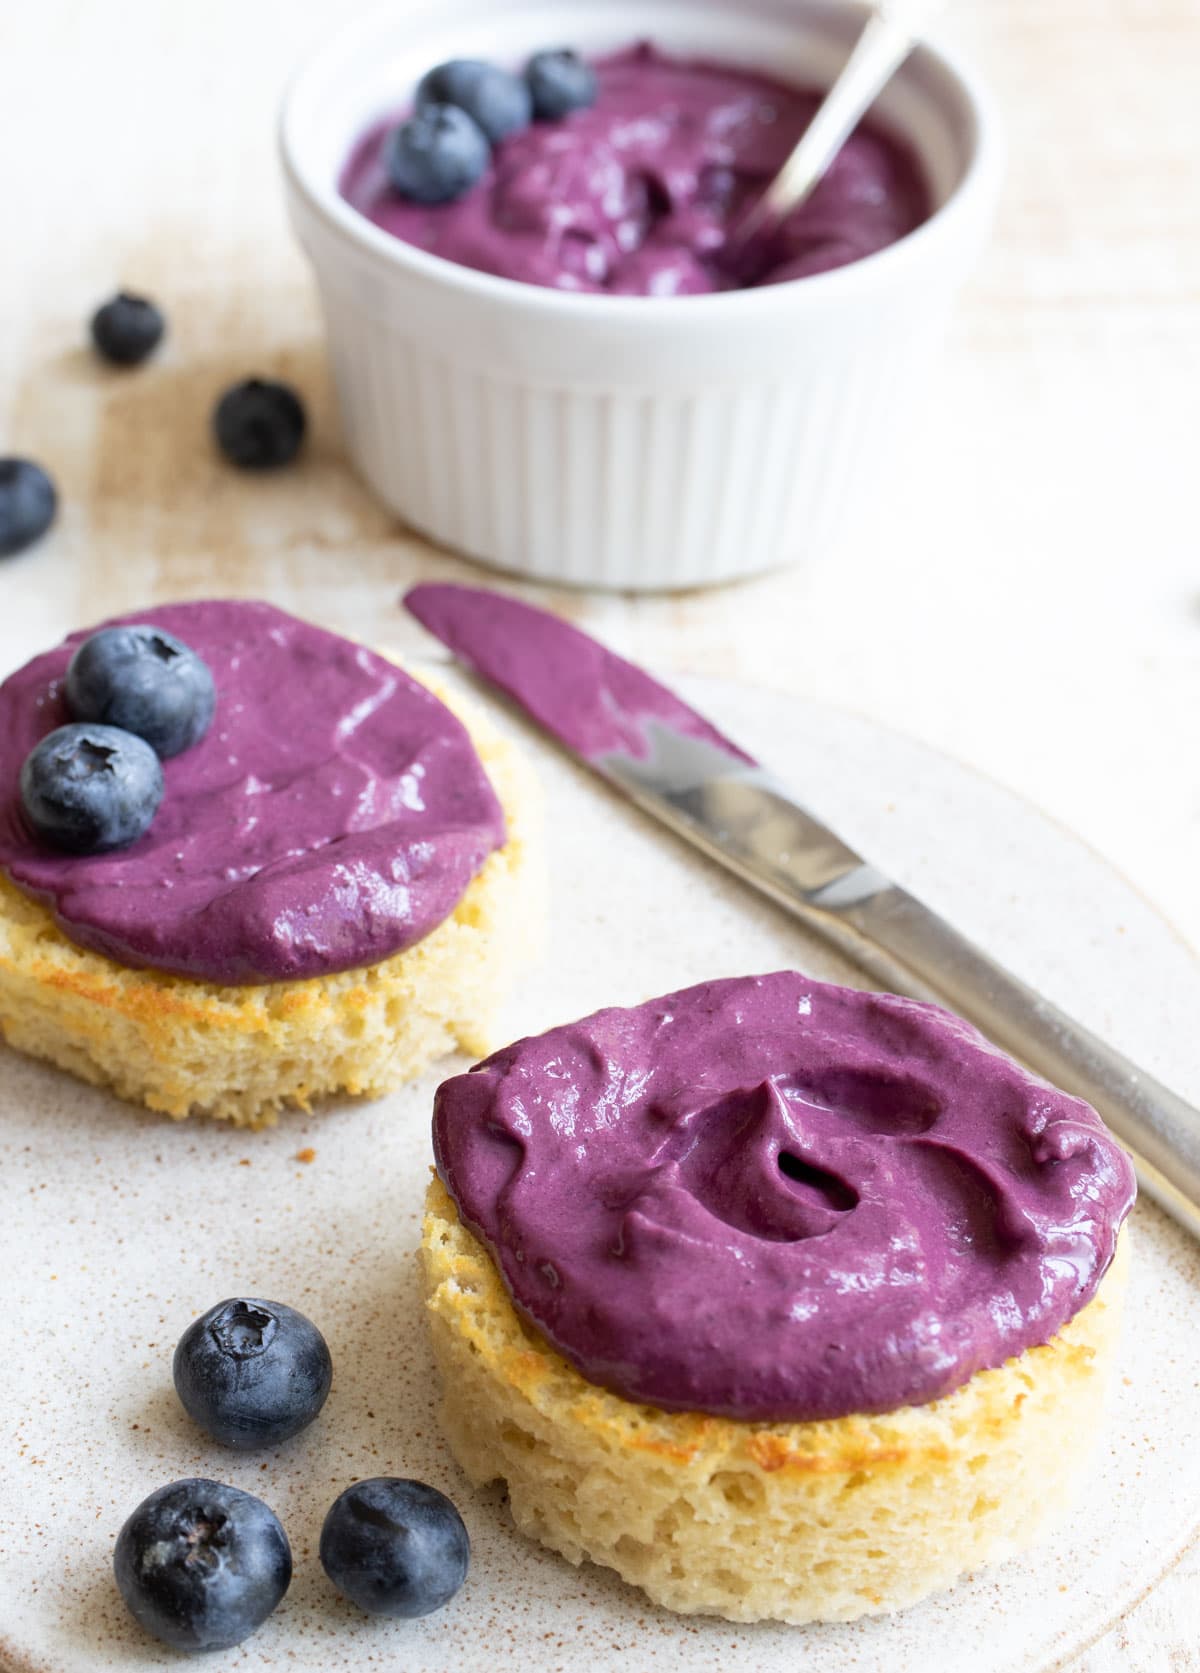 English muffins on a plate topped with blueberry cream cheese.